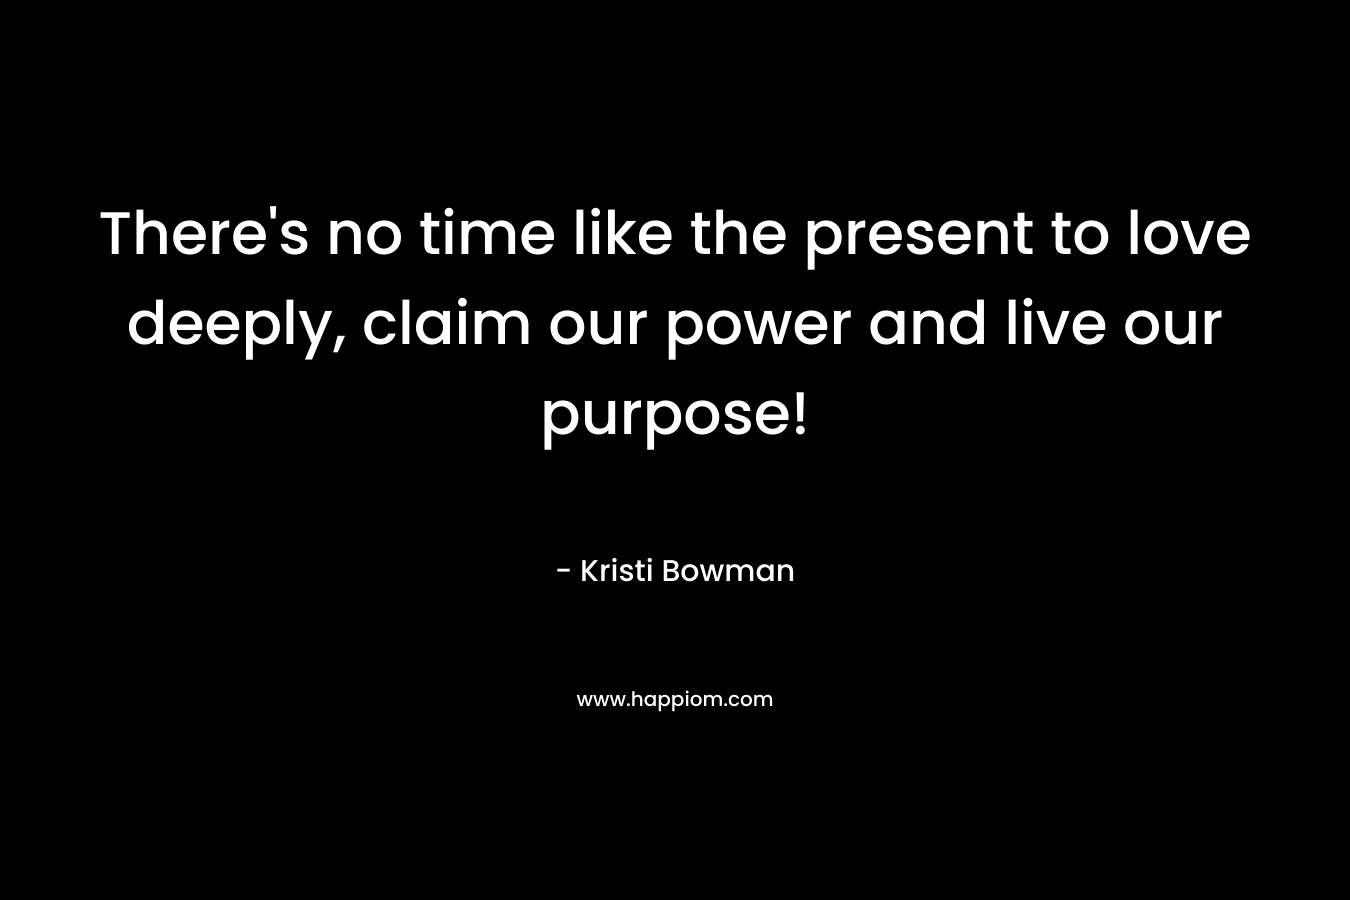 There’s no time like the present to love deeply, claim our power and live our purpose! – Kristi Bowman